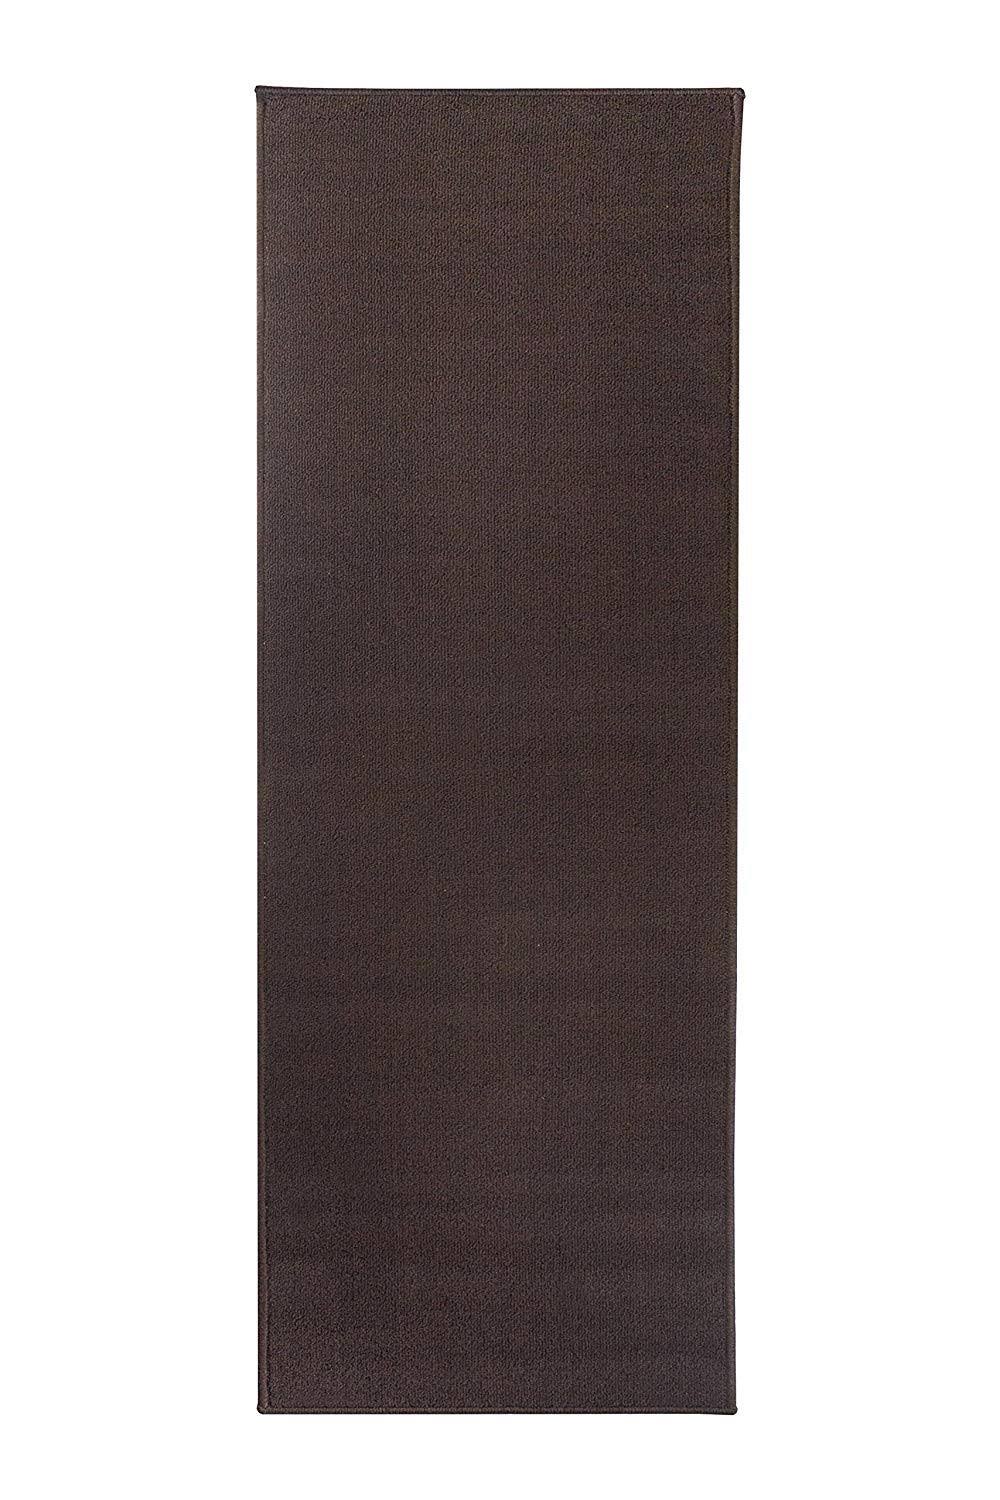 Ritz Accent Door Rug Runner with Non-Slip Latex Backing, 20-Inch by 60-Inch Kitchen & Bathroom Runner Rug, Chocolate Brown